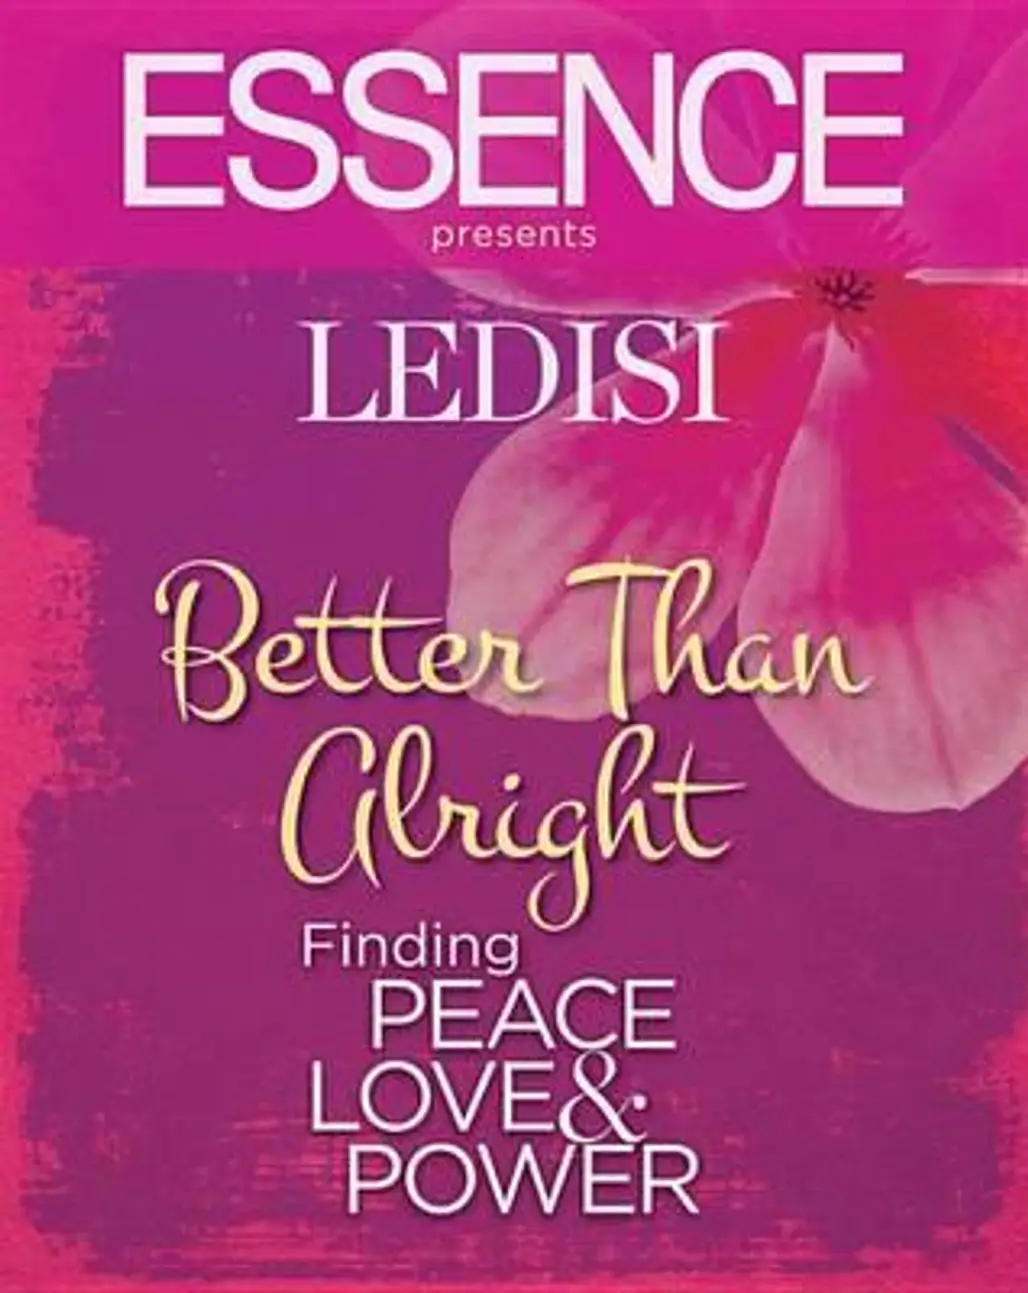 Essence Presents Ledisi Better than Alright: Finding Peace, Love & Power by Ledisi